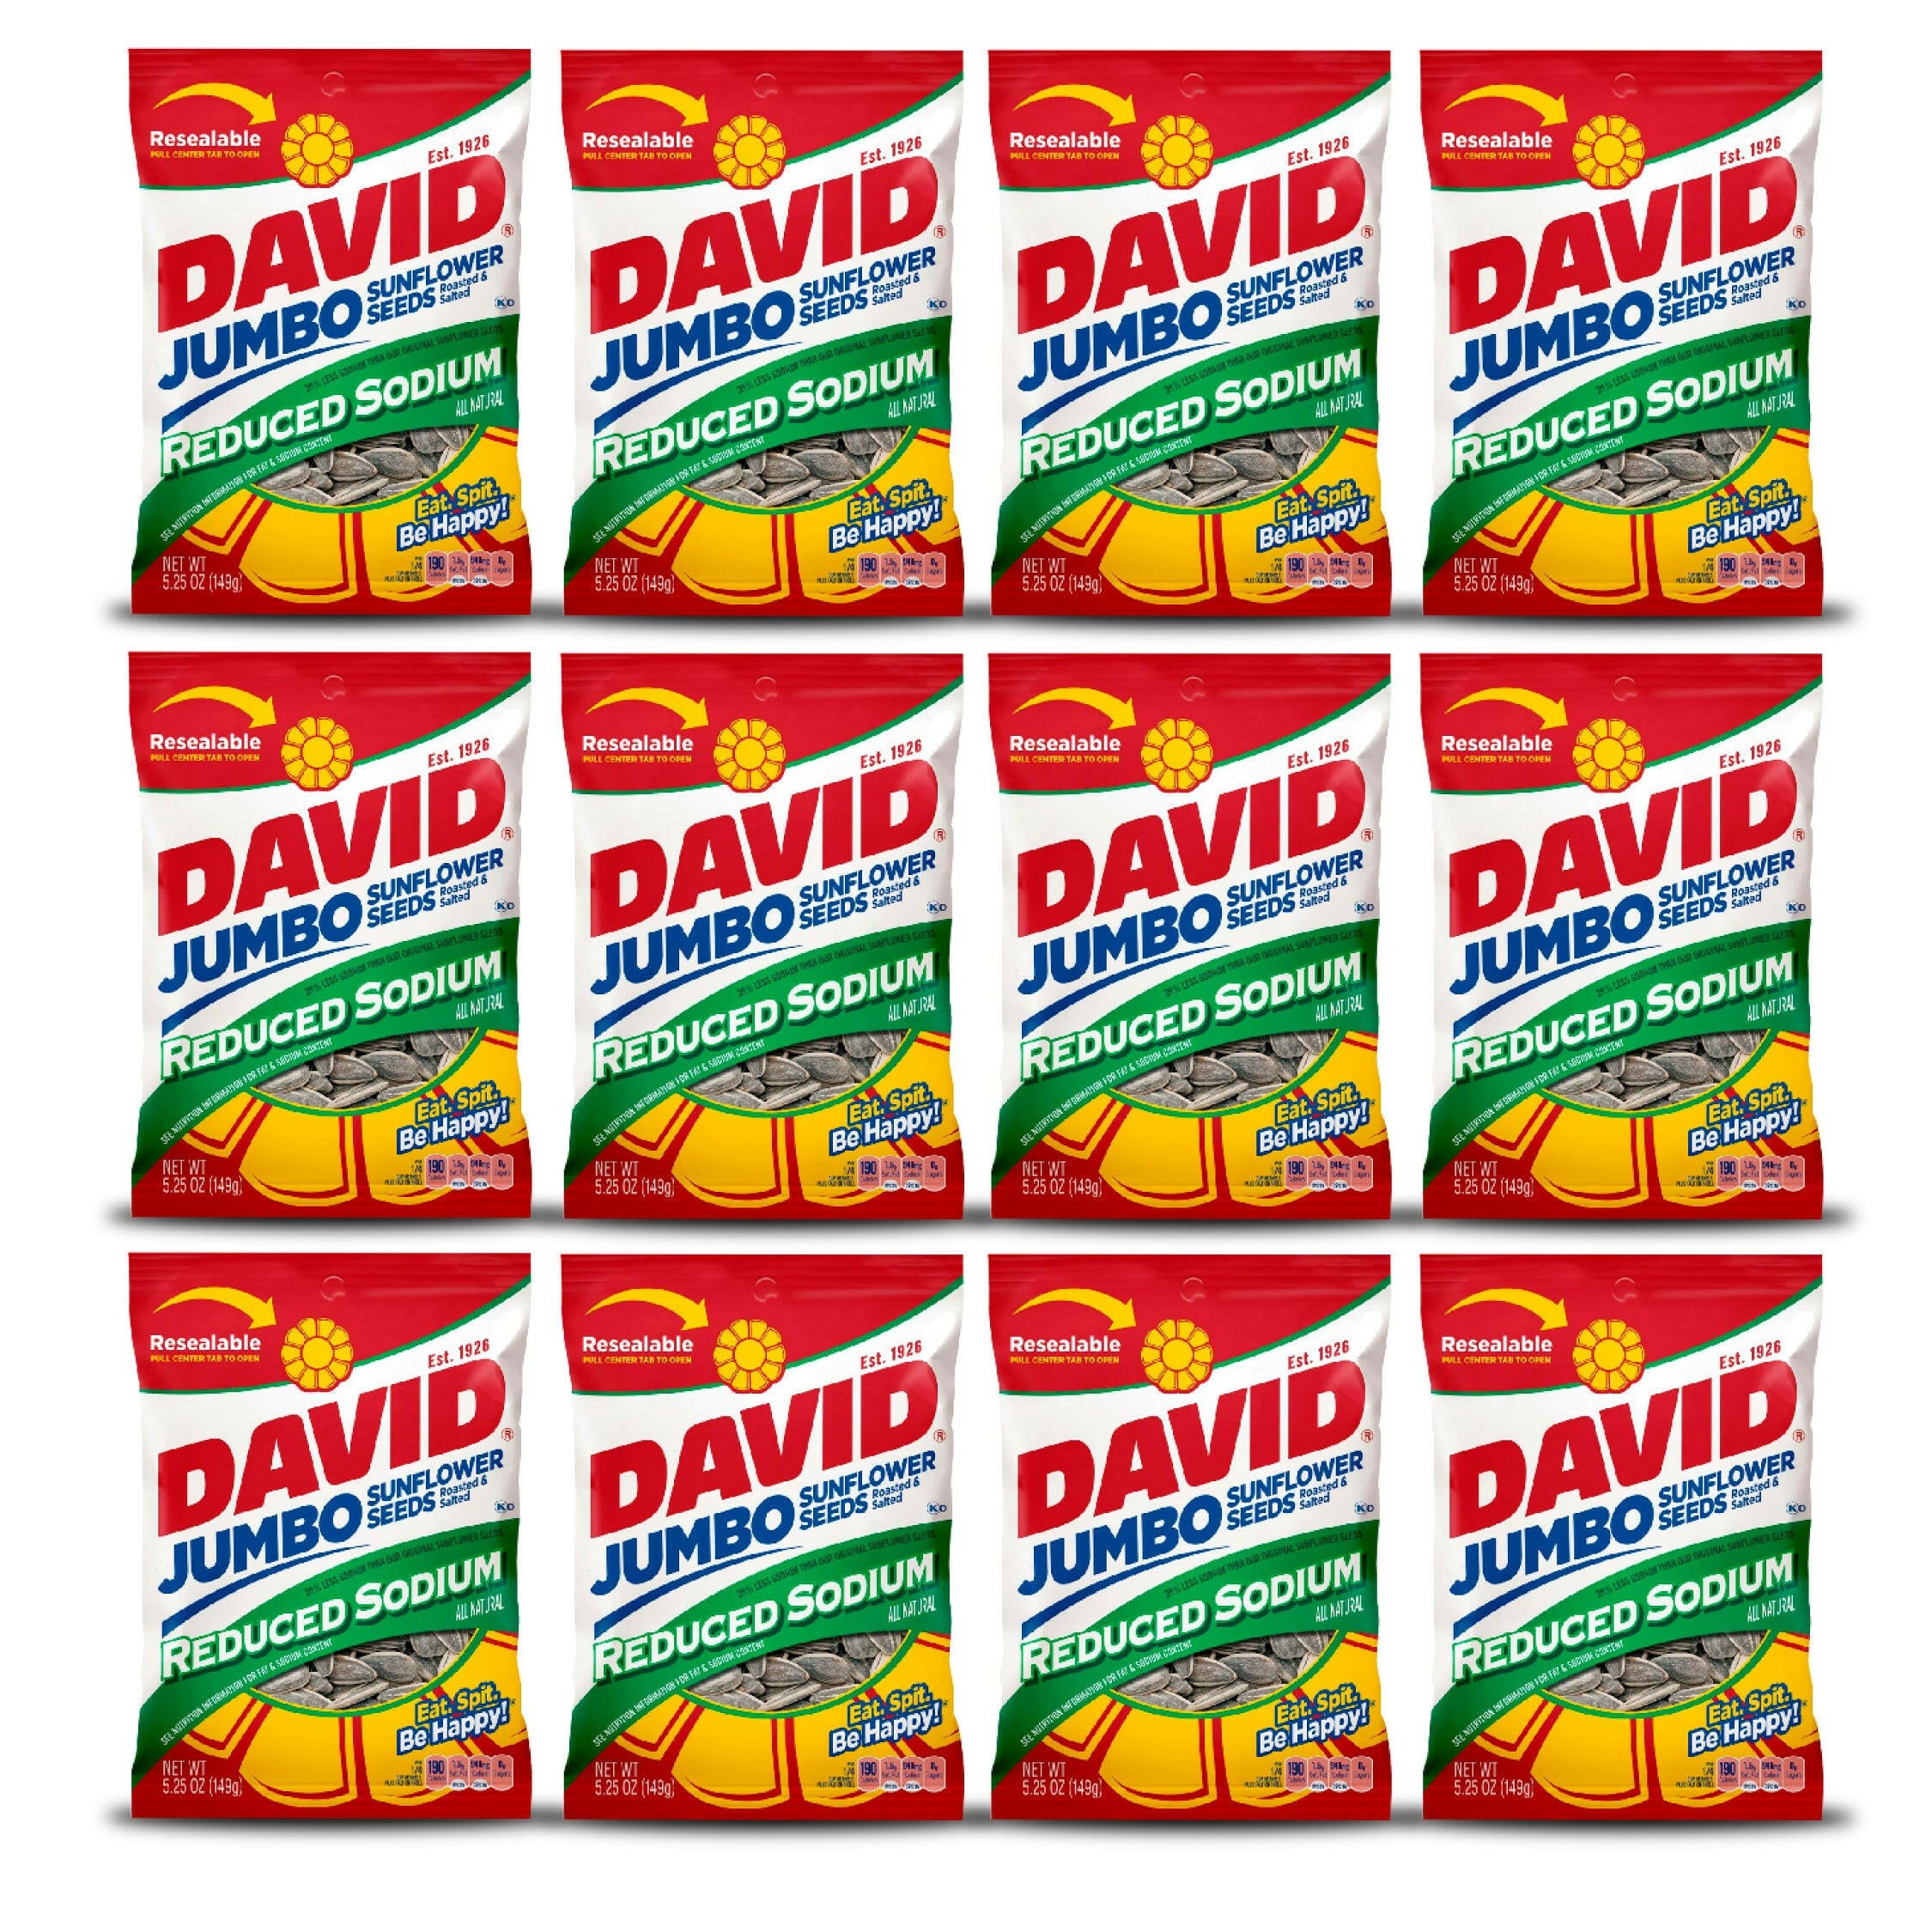 David Reduced Sodium In-Shell Sunflower Seeds 5.25 Ounce